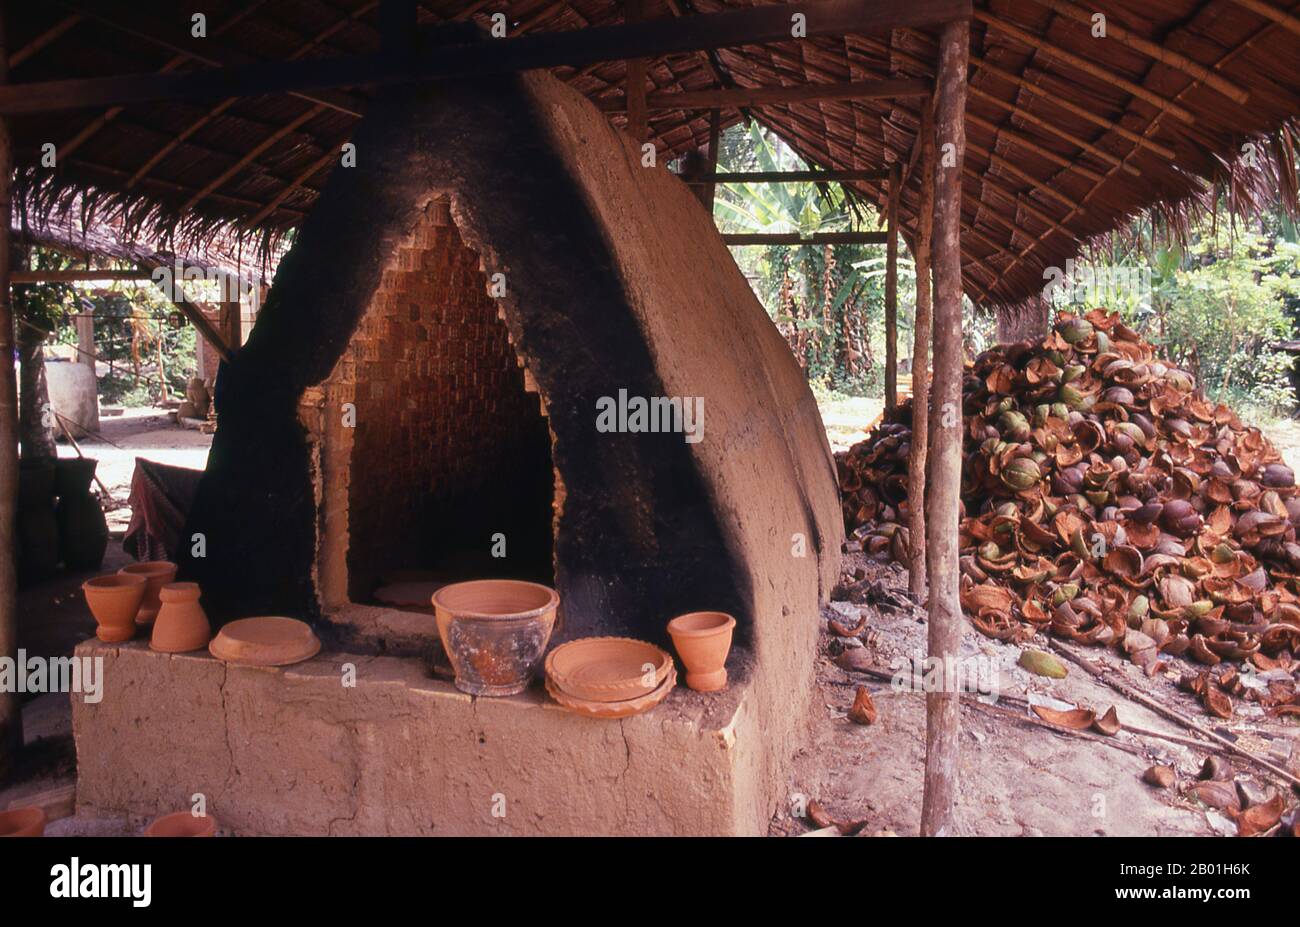 Thailand: Coconut husks used for firing a kiln, Nakhon Sri Thammarat, south Thailand.  Thai ceramics are renowned throughout the world and have over many years offered historians a unique perspective on Thai history. Ancient kilns can be found in many areas of the country including Sawankhalok and Si Satchanalai in Sukhothai Province. Stock Photo